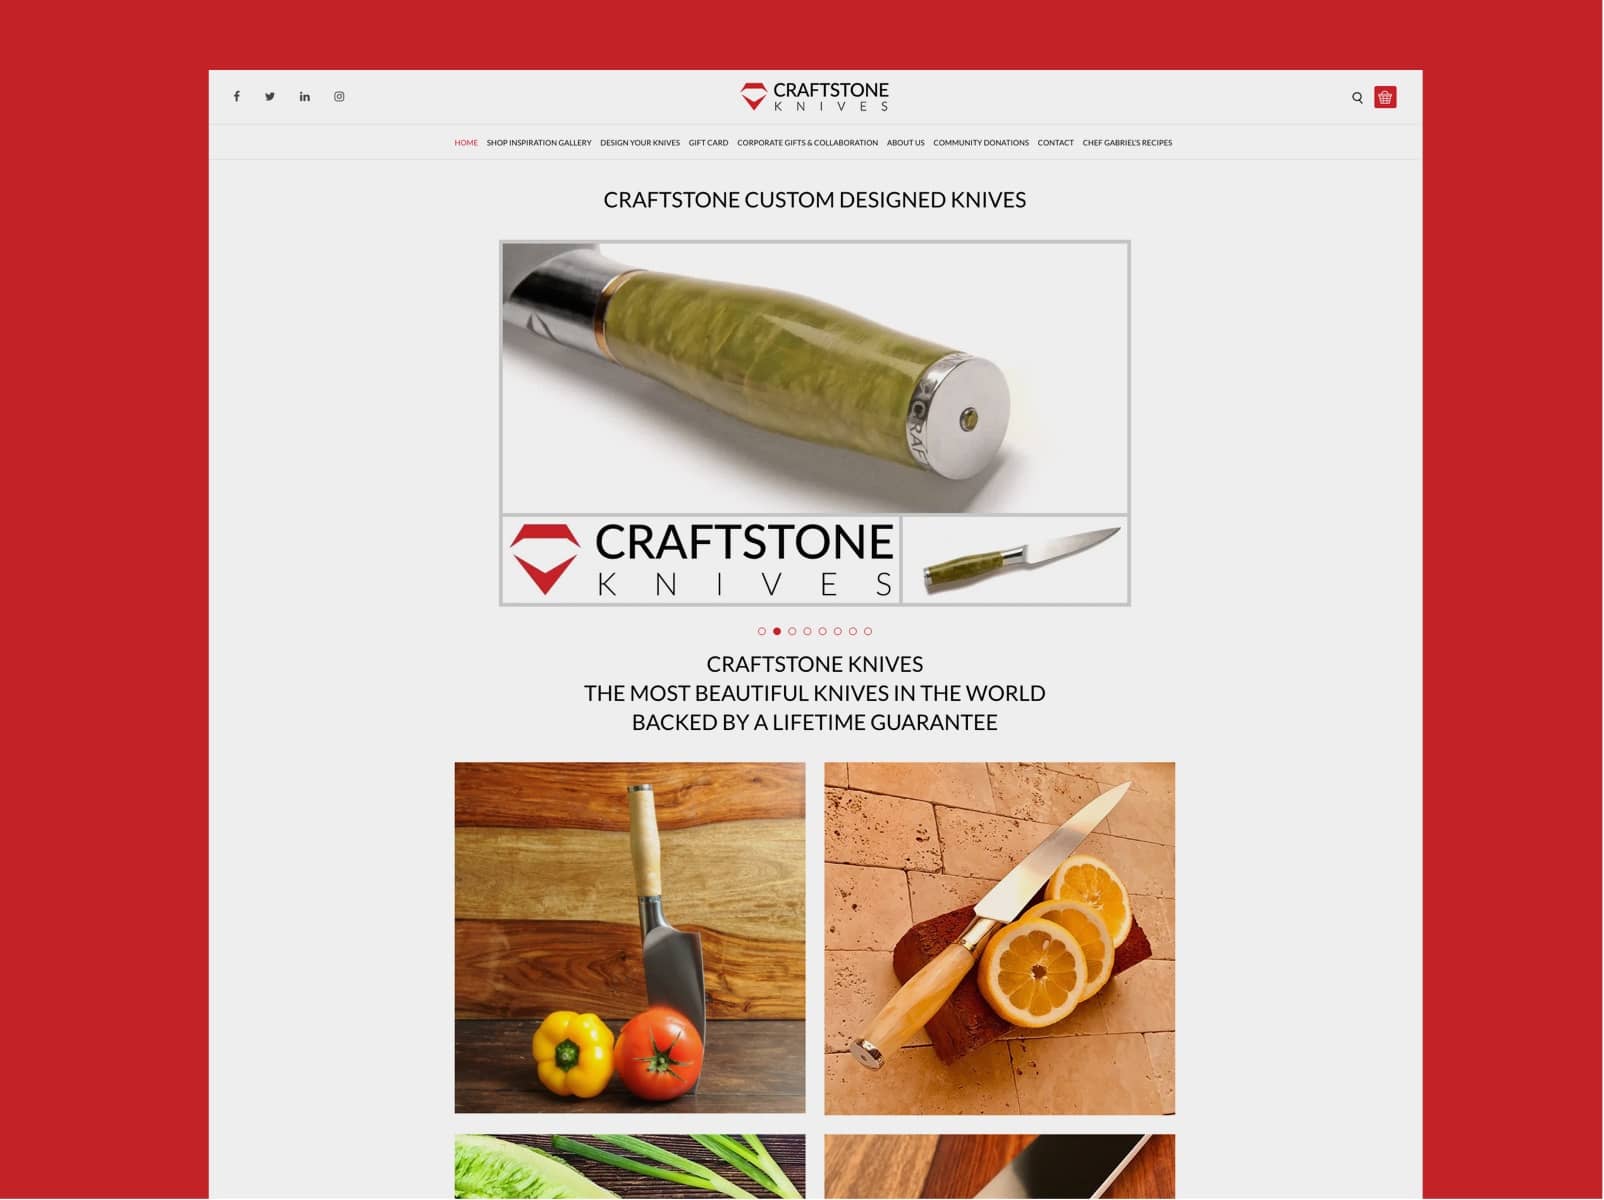 Craftstone Knives product personalization work